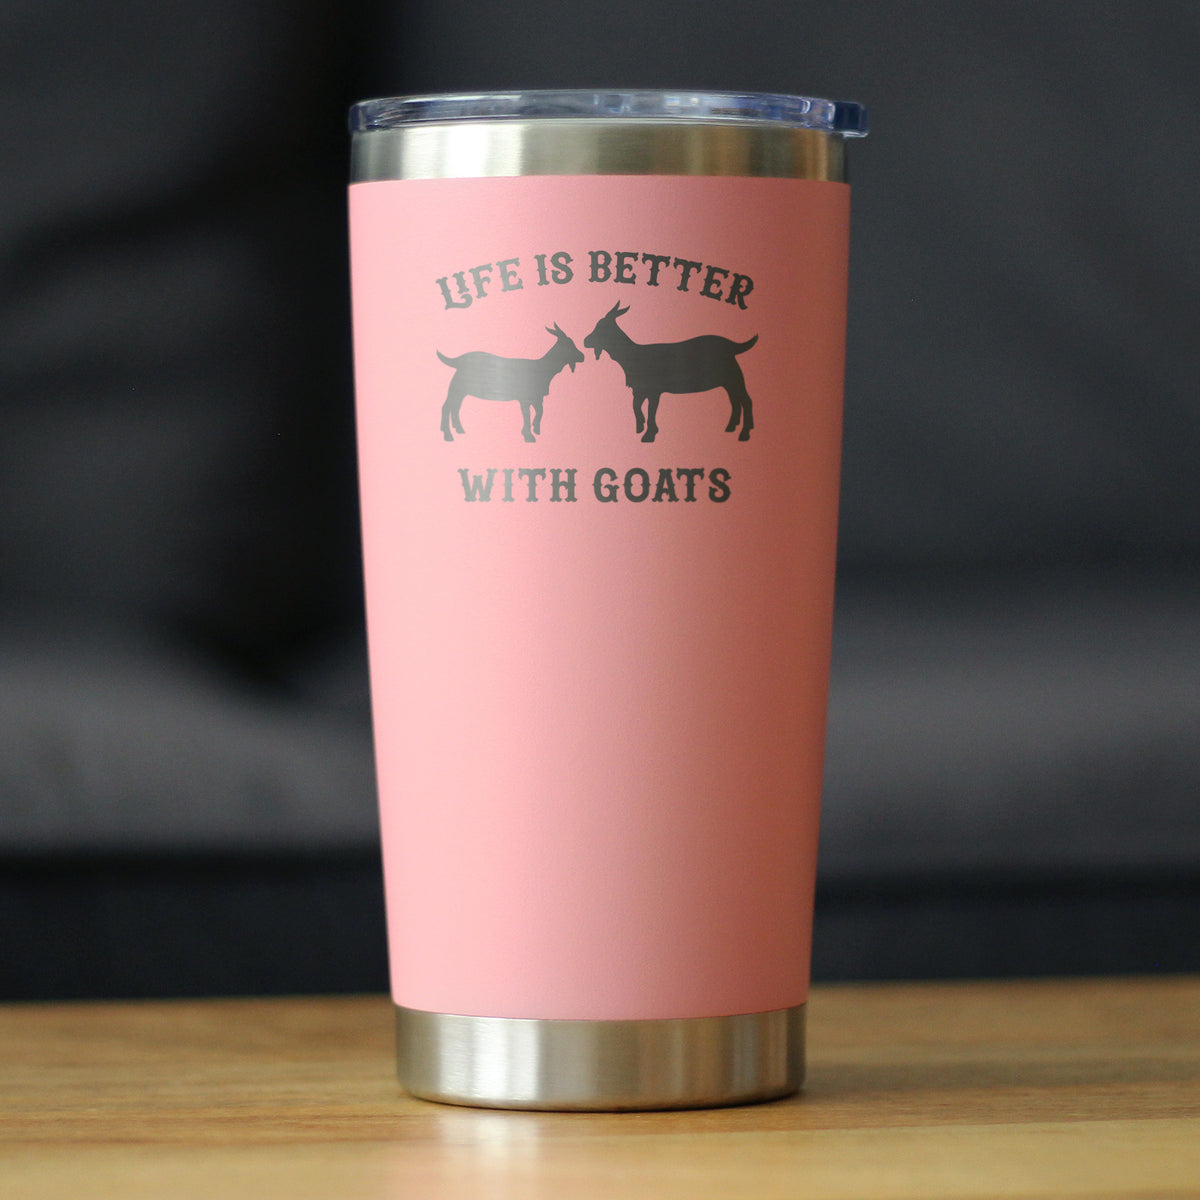 Life is Better With Goats - Insulated Coffee Tumbler Cup with Sliding Lid - Stainless Steel Insulated Mug - Funny Goat Themed Gift for Women and Men